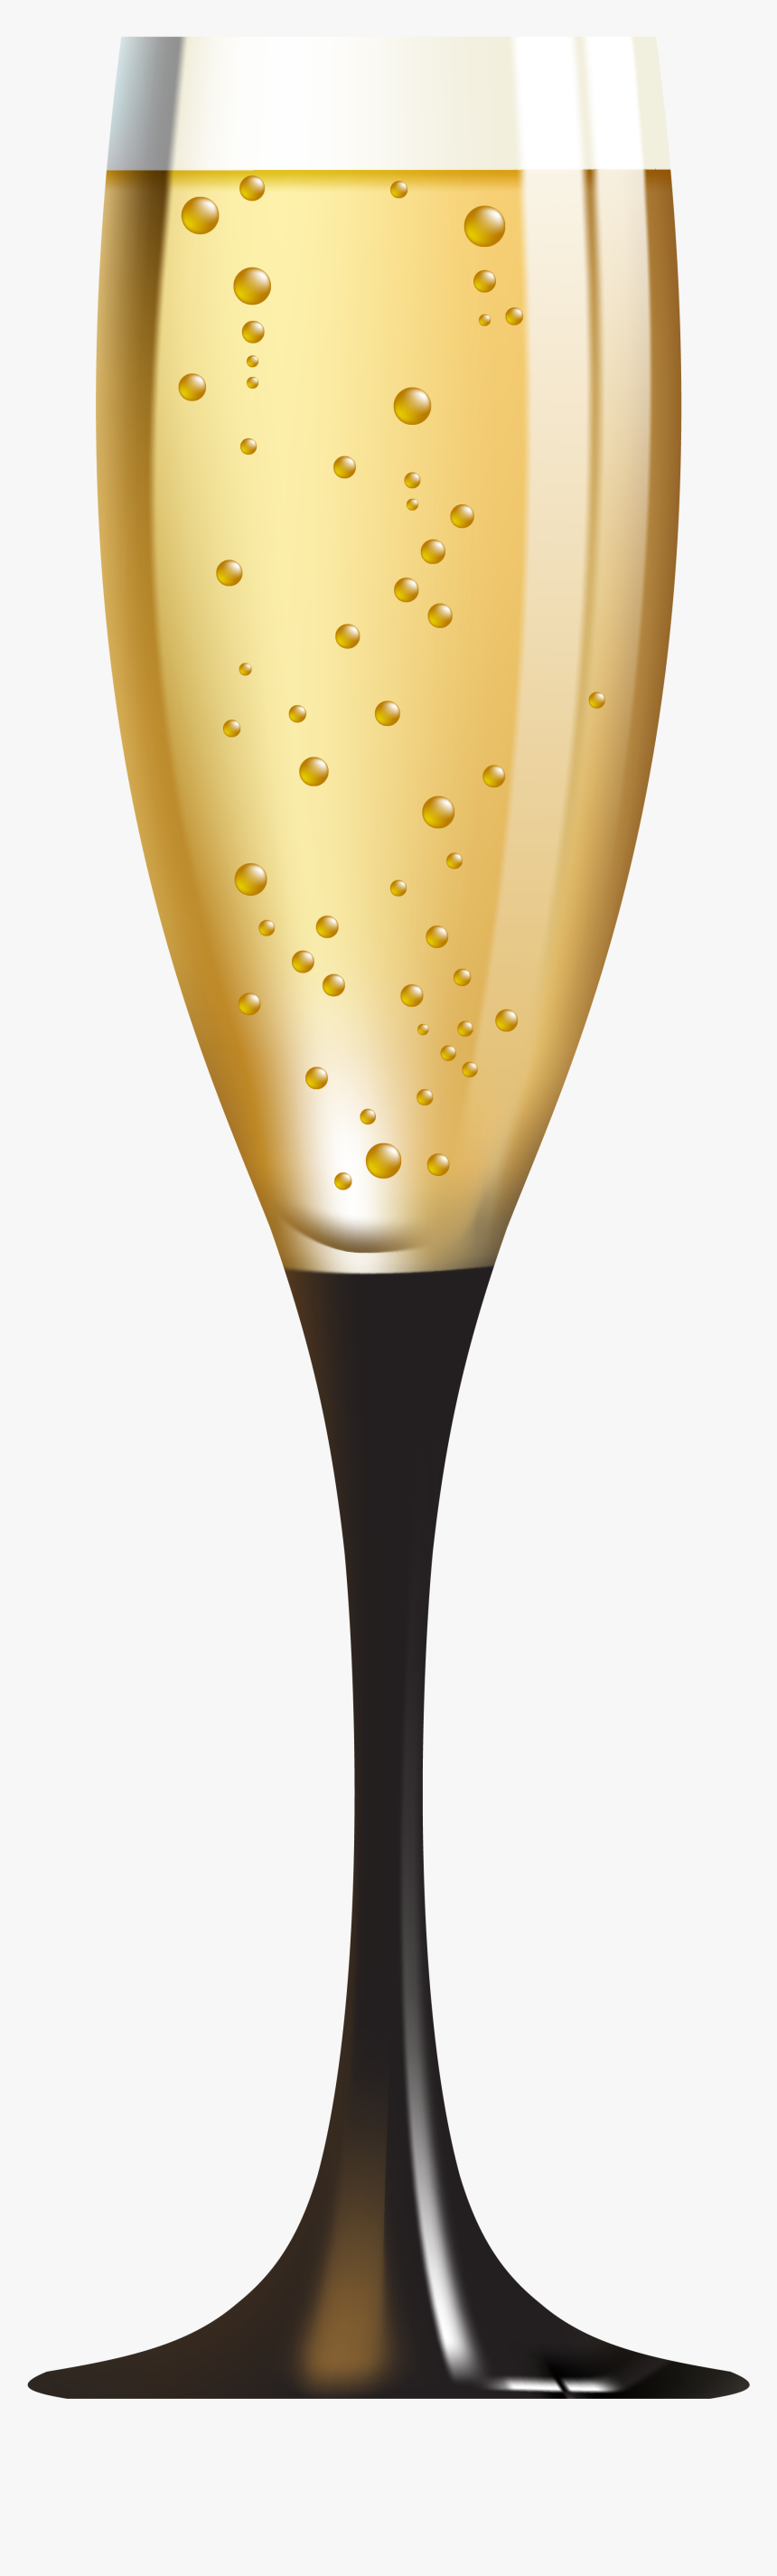 Cocktail Clipart Champagne Glass - Champagne Flute Clip Art, HD Png Download, Free Download